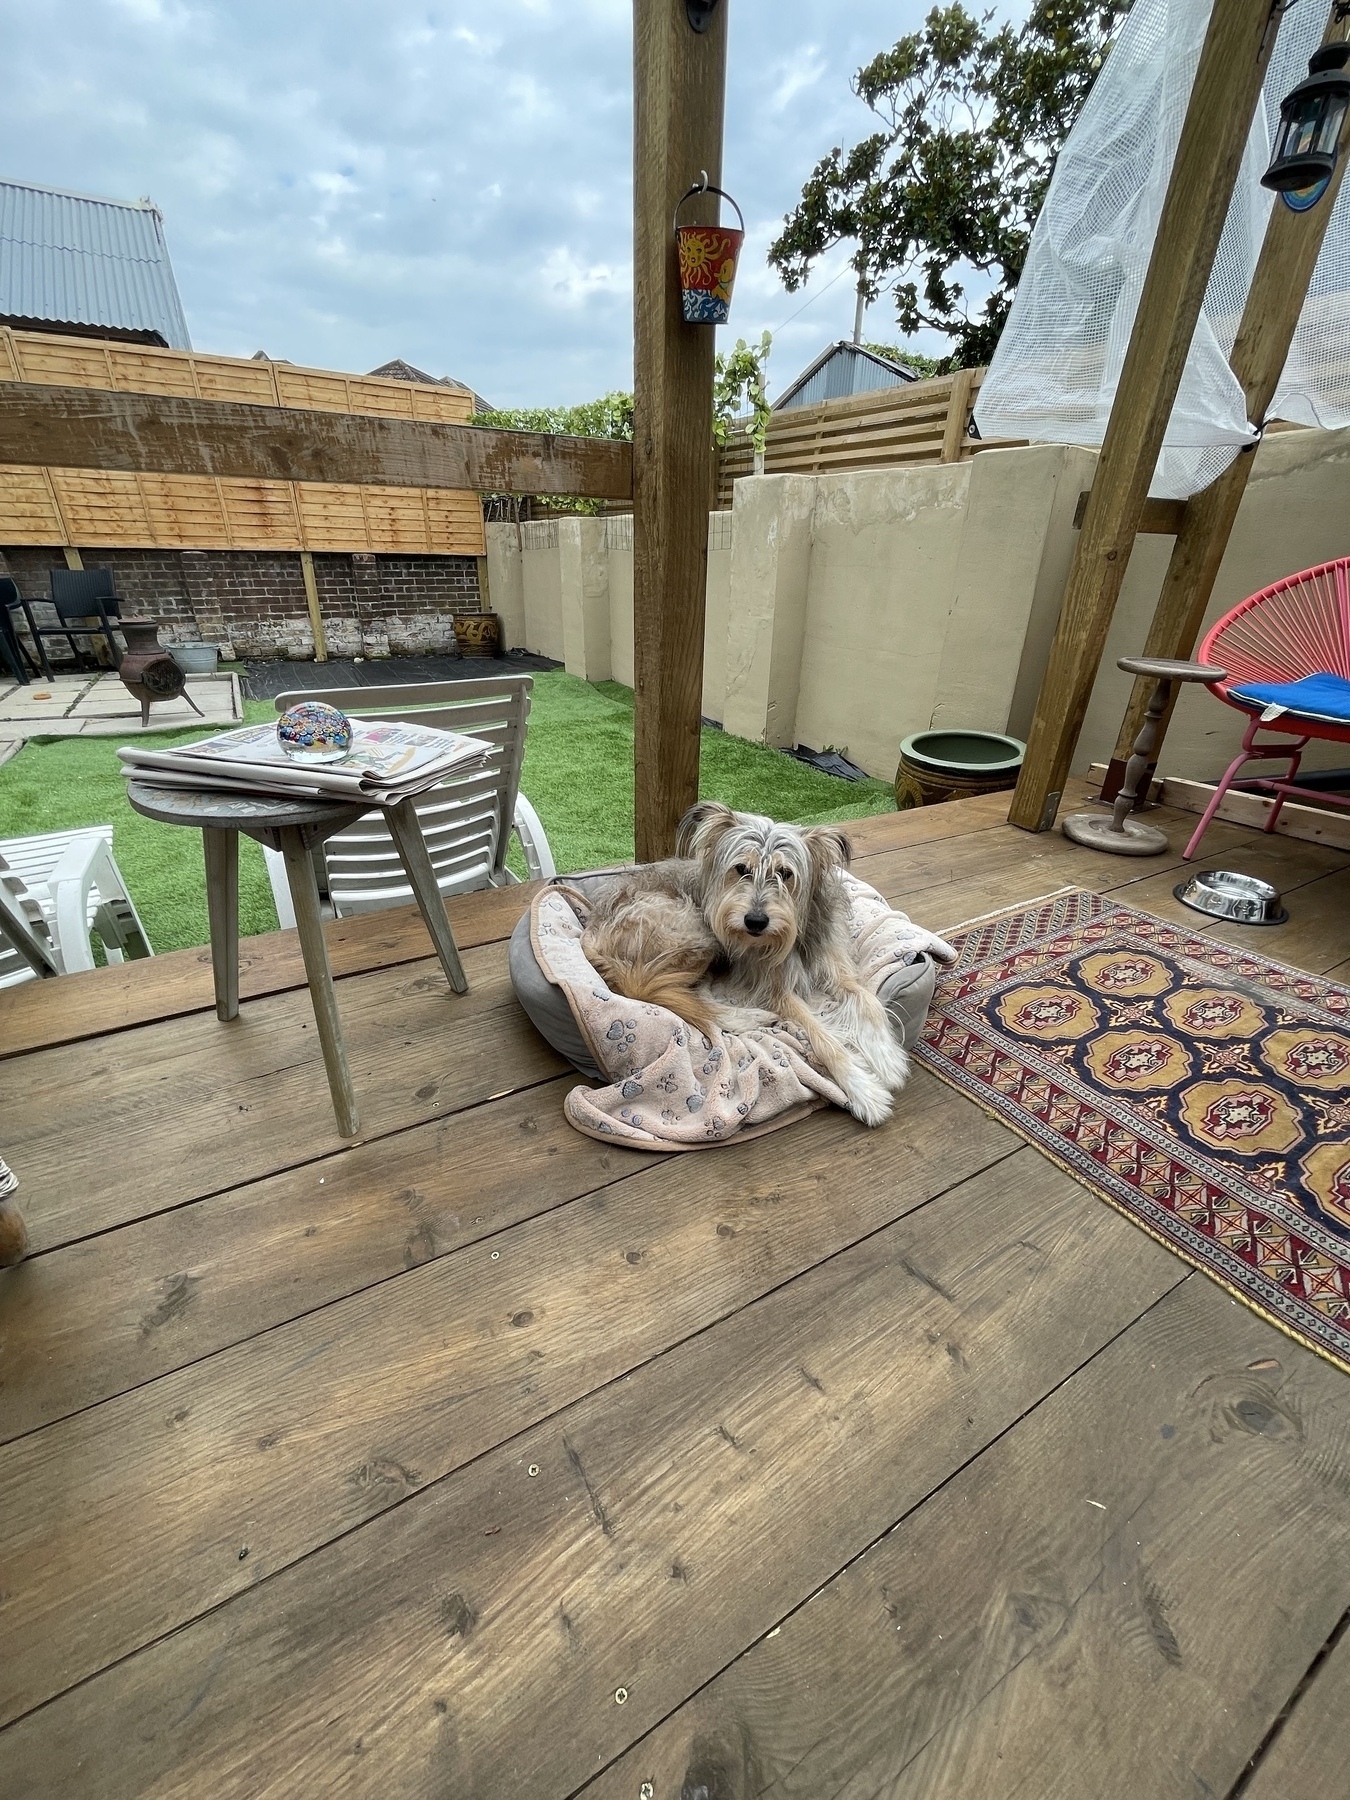 Monty the dog sits outside in our garden on the wooden decking in his comfy bed